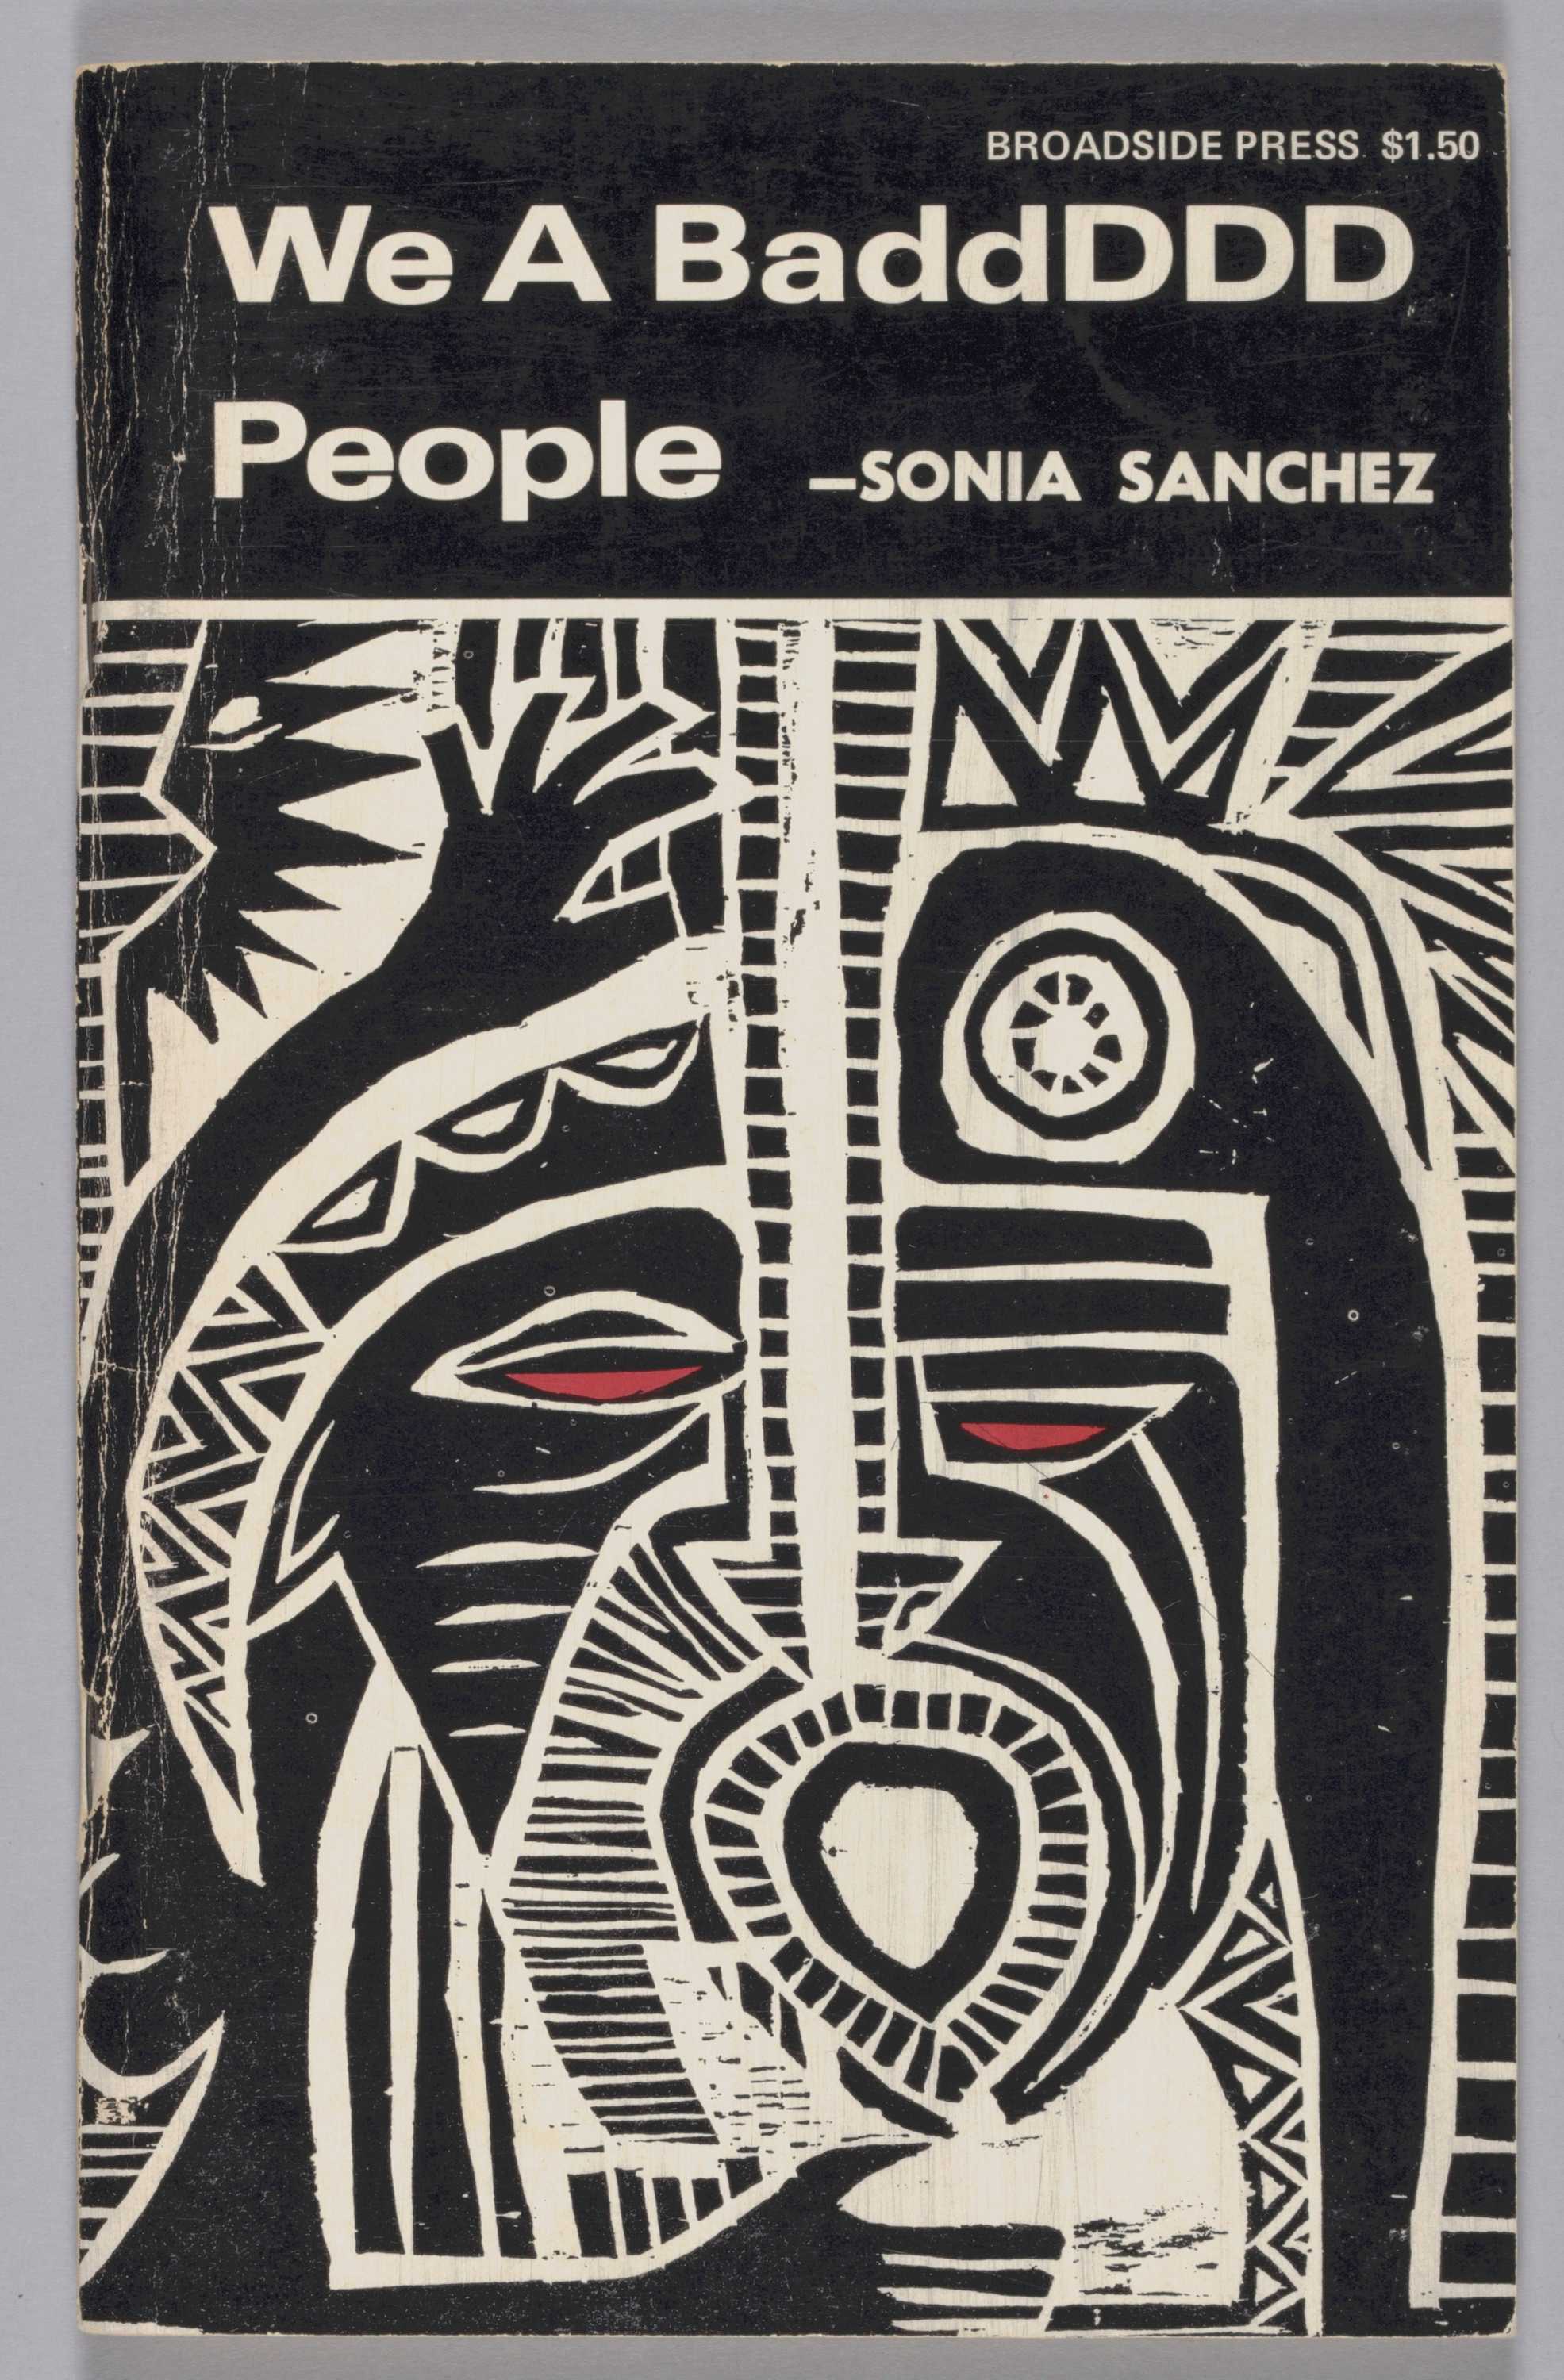 A compilation of poems written by Sonia Sanchez and published in 1970.